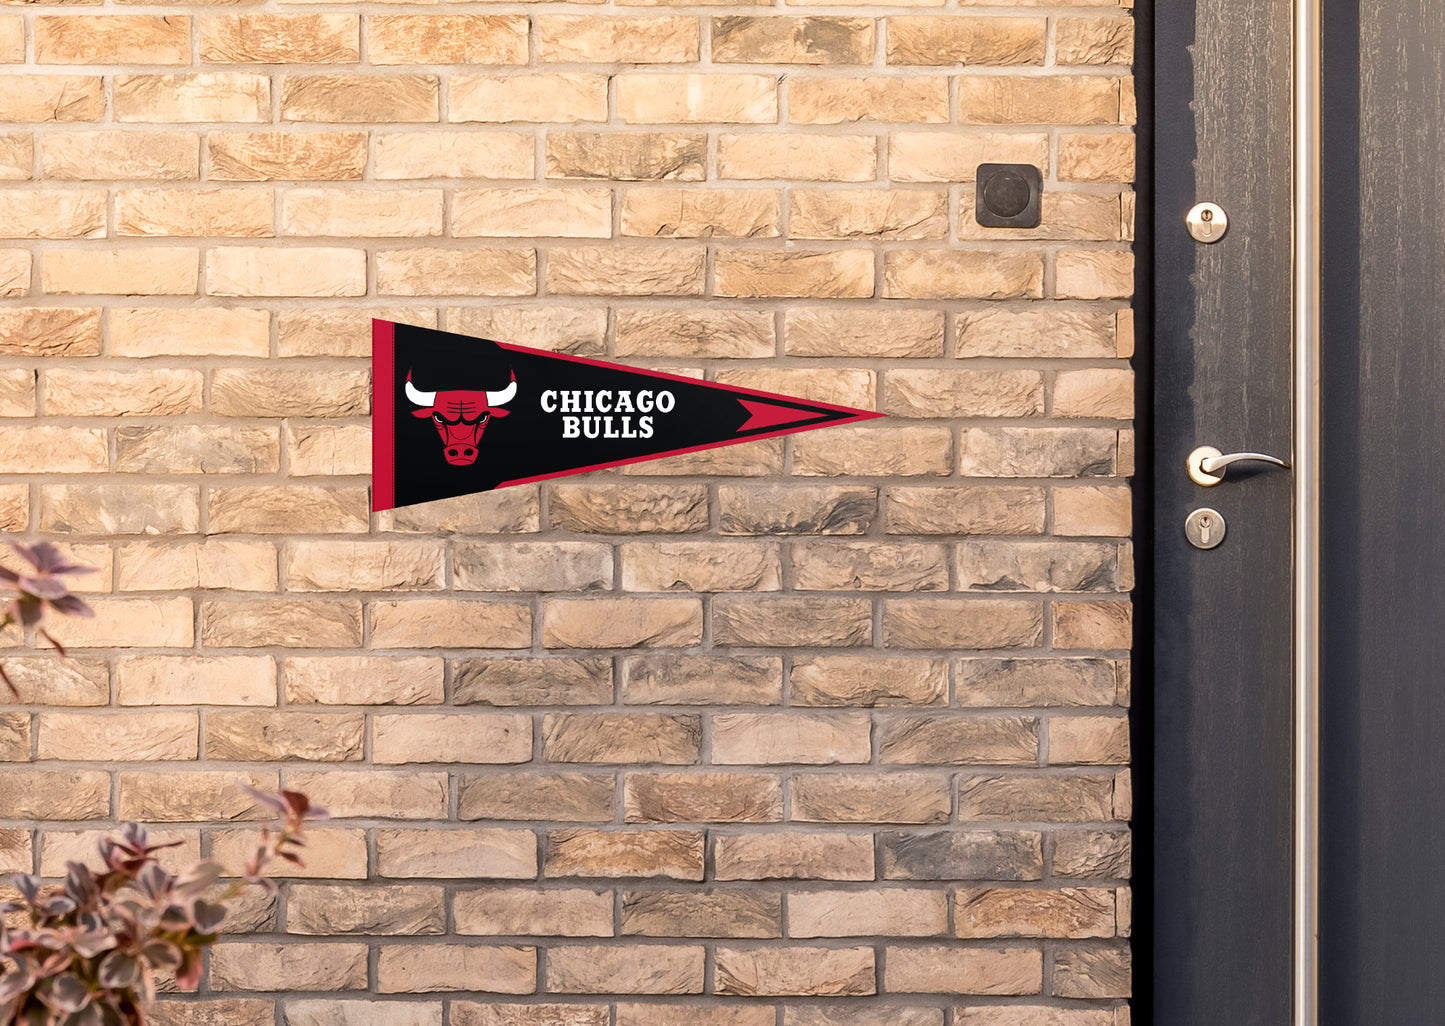 Chicago Bulls: Pennant - Officially Licensed NBA Outdoor Graphic